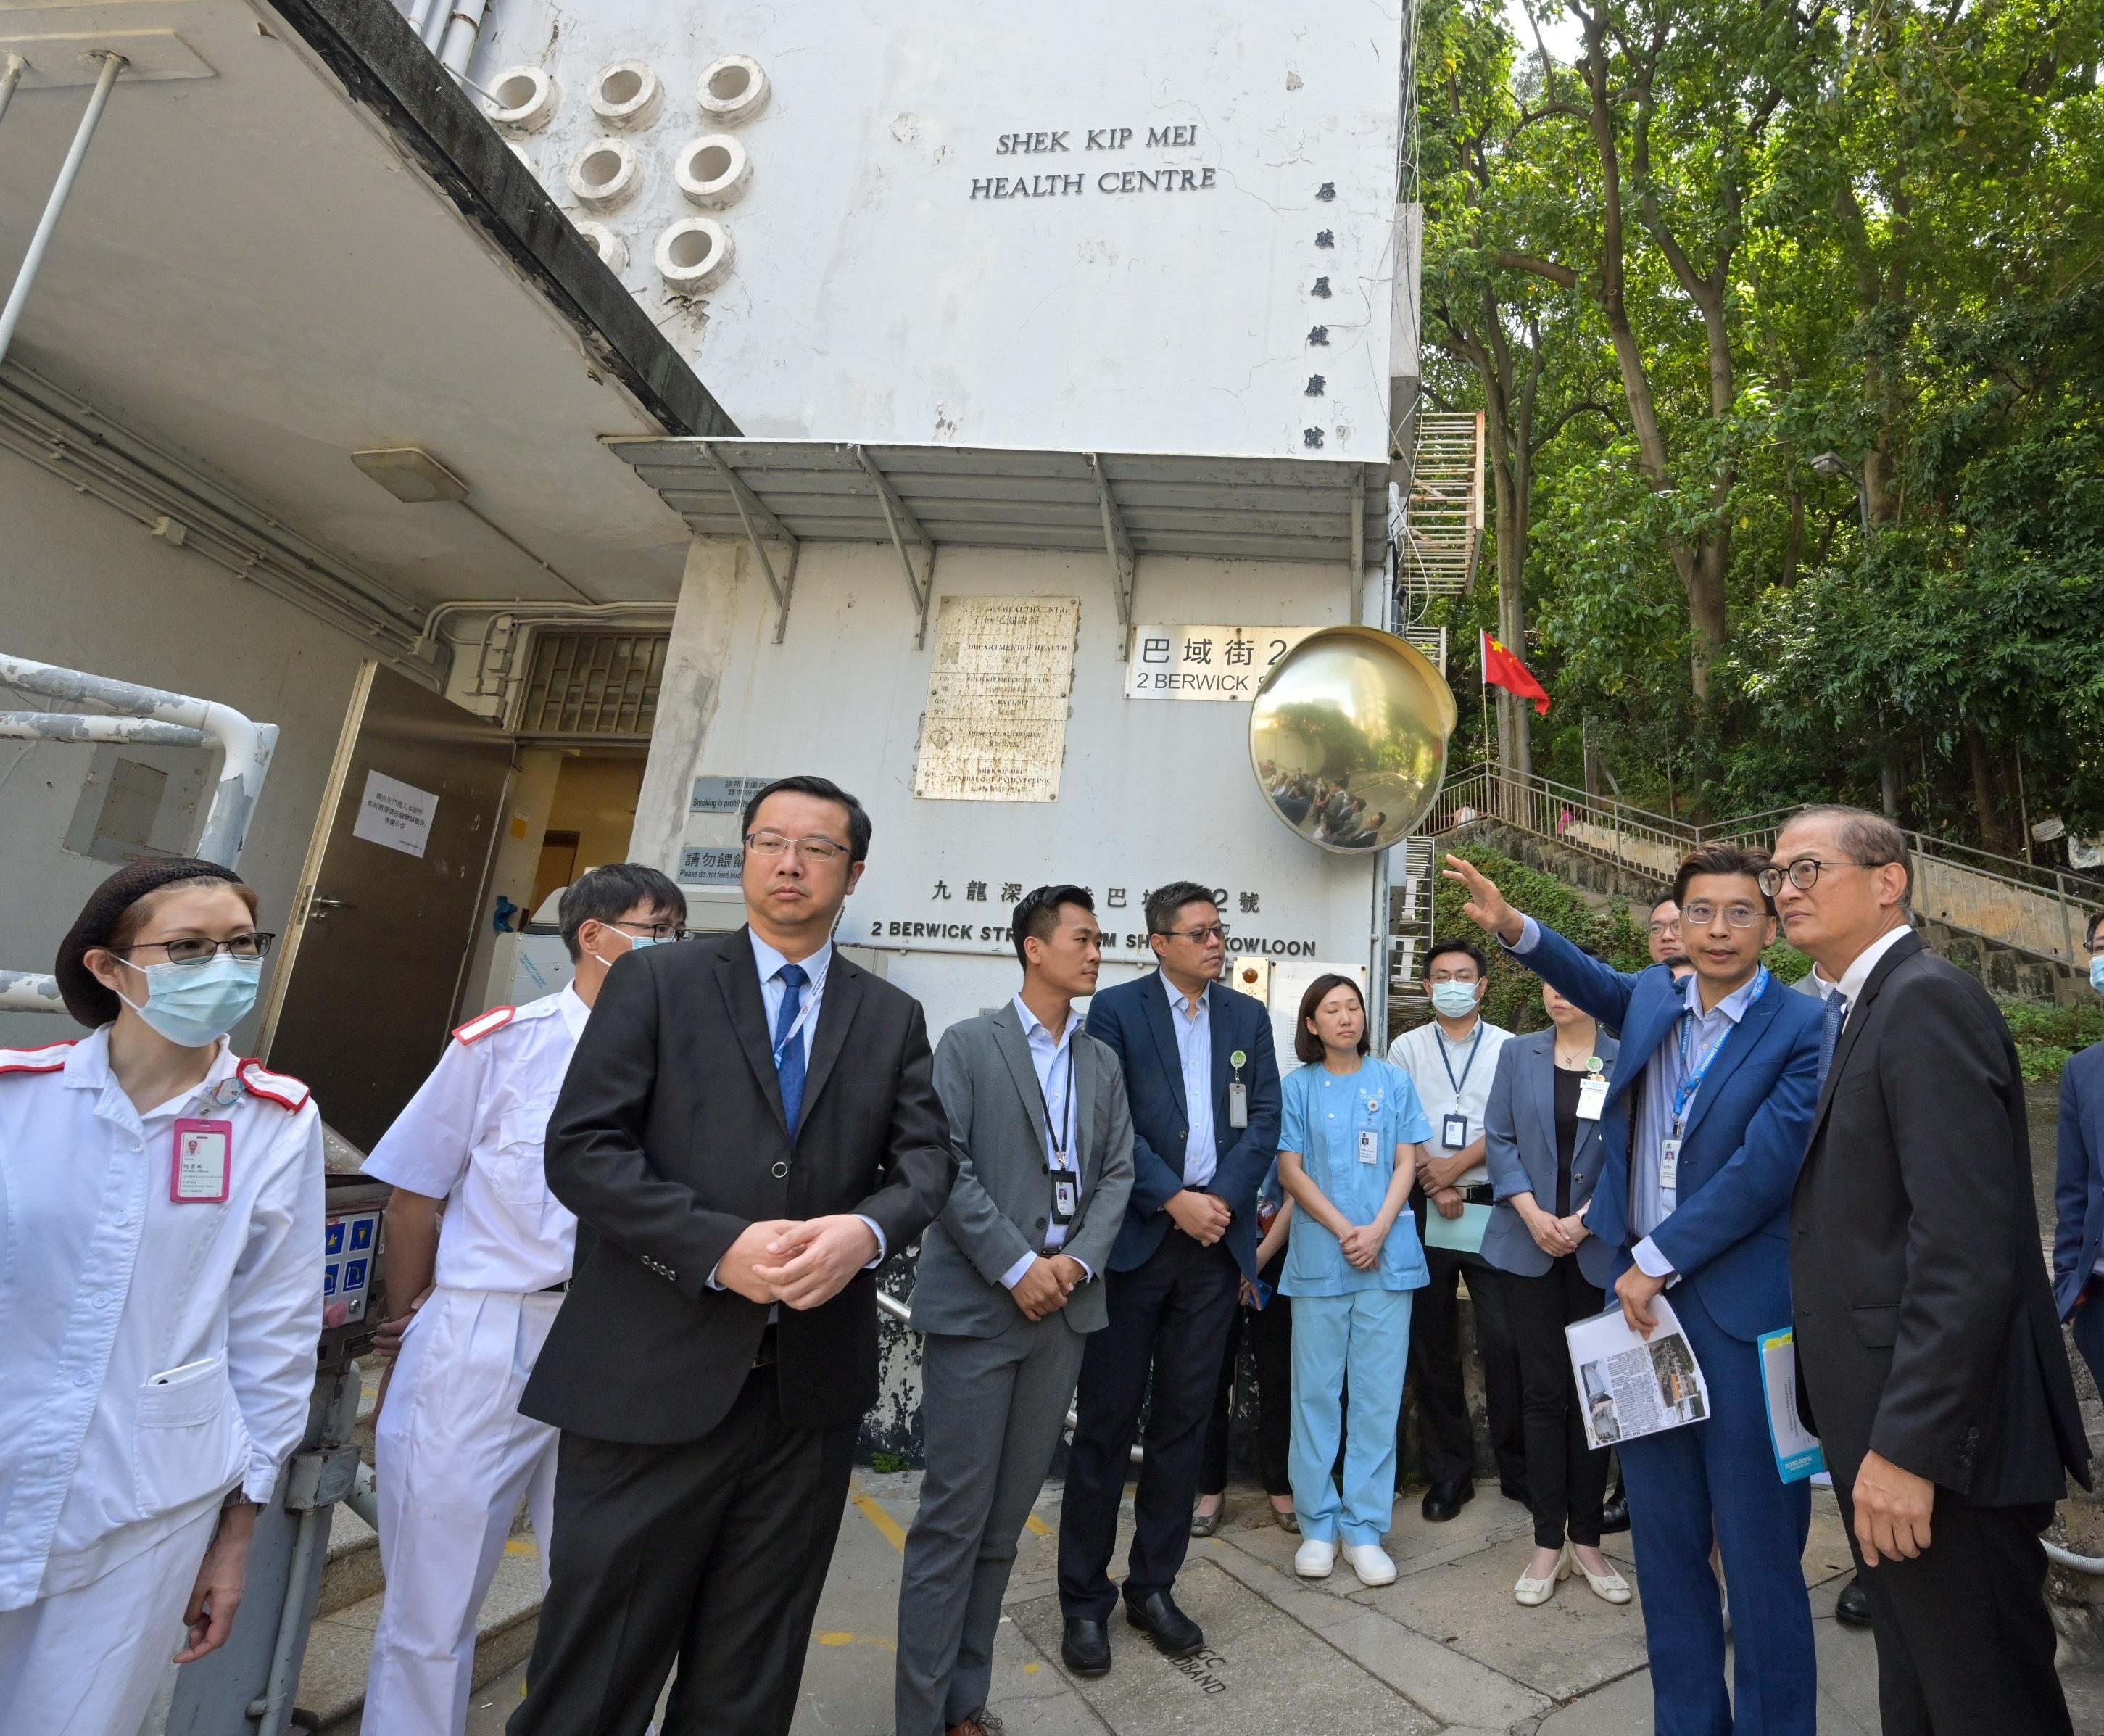 The Secretary for Health, Professor Lo Chung-mau, visited the Shek Kip Mei Health Centre and the temporary Shek Kip Mei General Out-patient Clinic this morning (September 27). Photos shows Professor Lo (first right) receiving an introduction on redevelopment details of the centre by staff members at the Shek Kip Mei Health Centre.